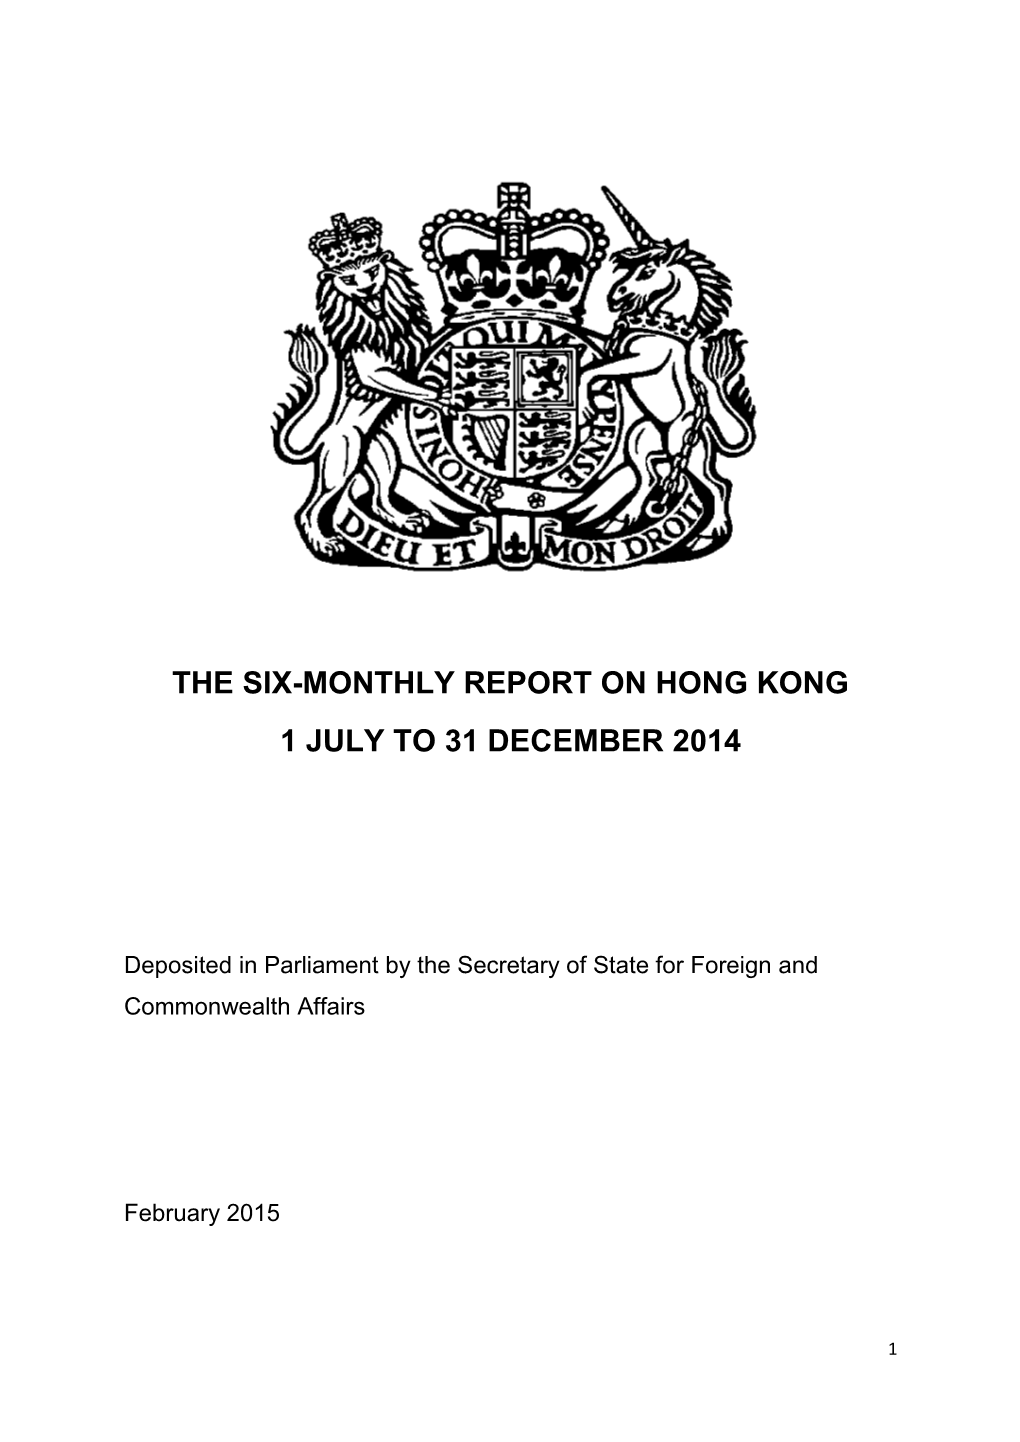 The Six-Monthly Report on Hong Kong 1 July to 31 December 2014